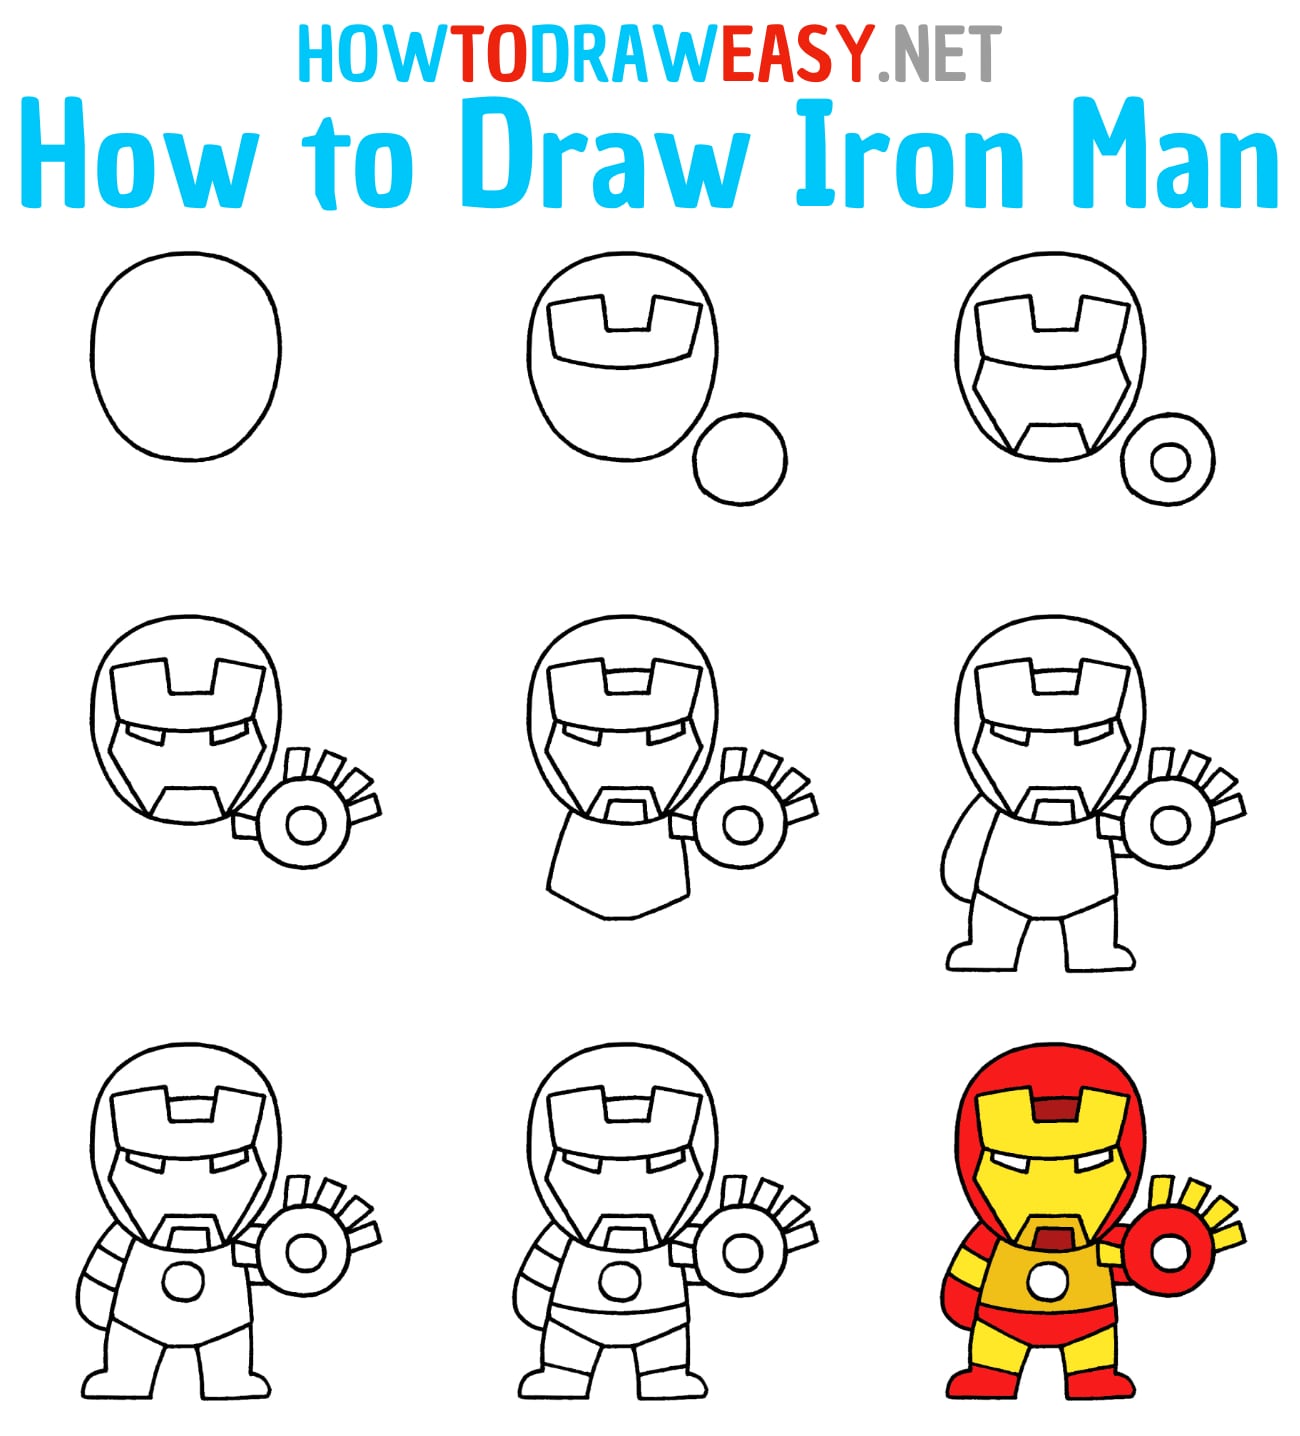 How to Draw Iron Man for Kids   How to Draw Easy